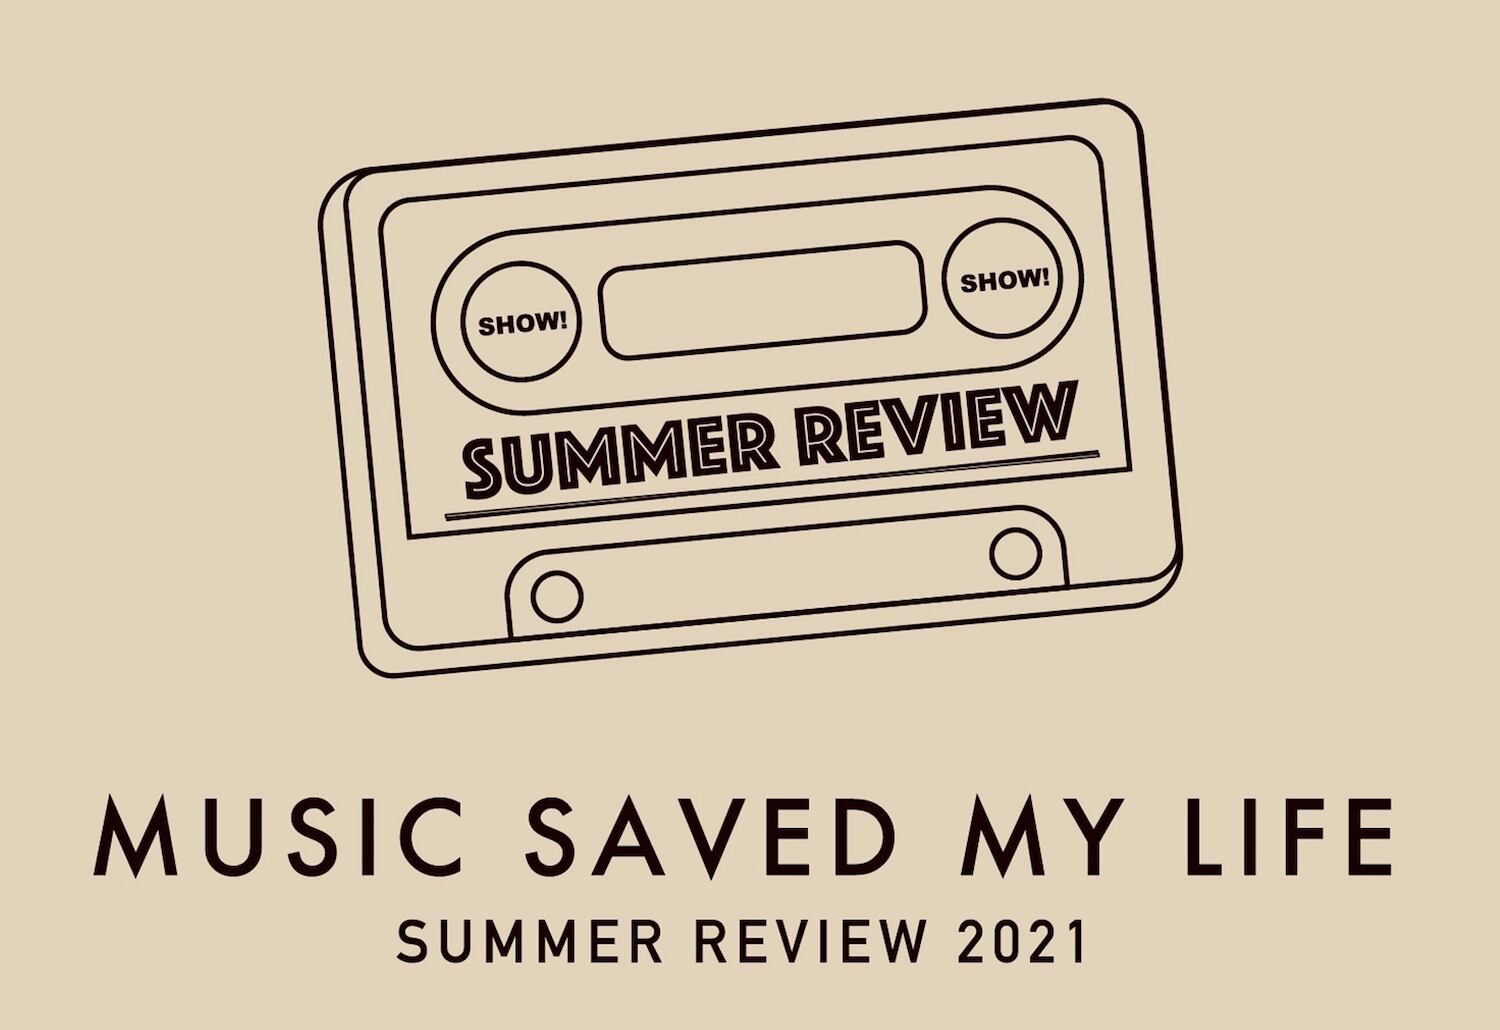 SHOW! Summer Review 2021